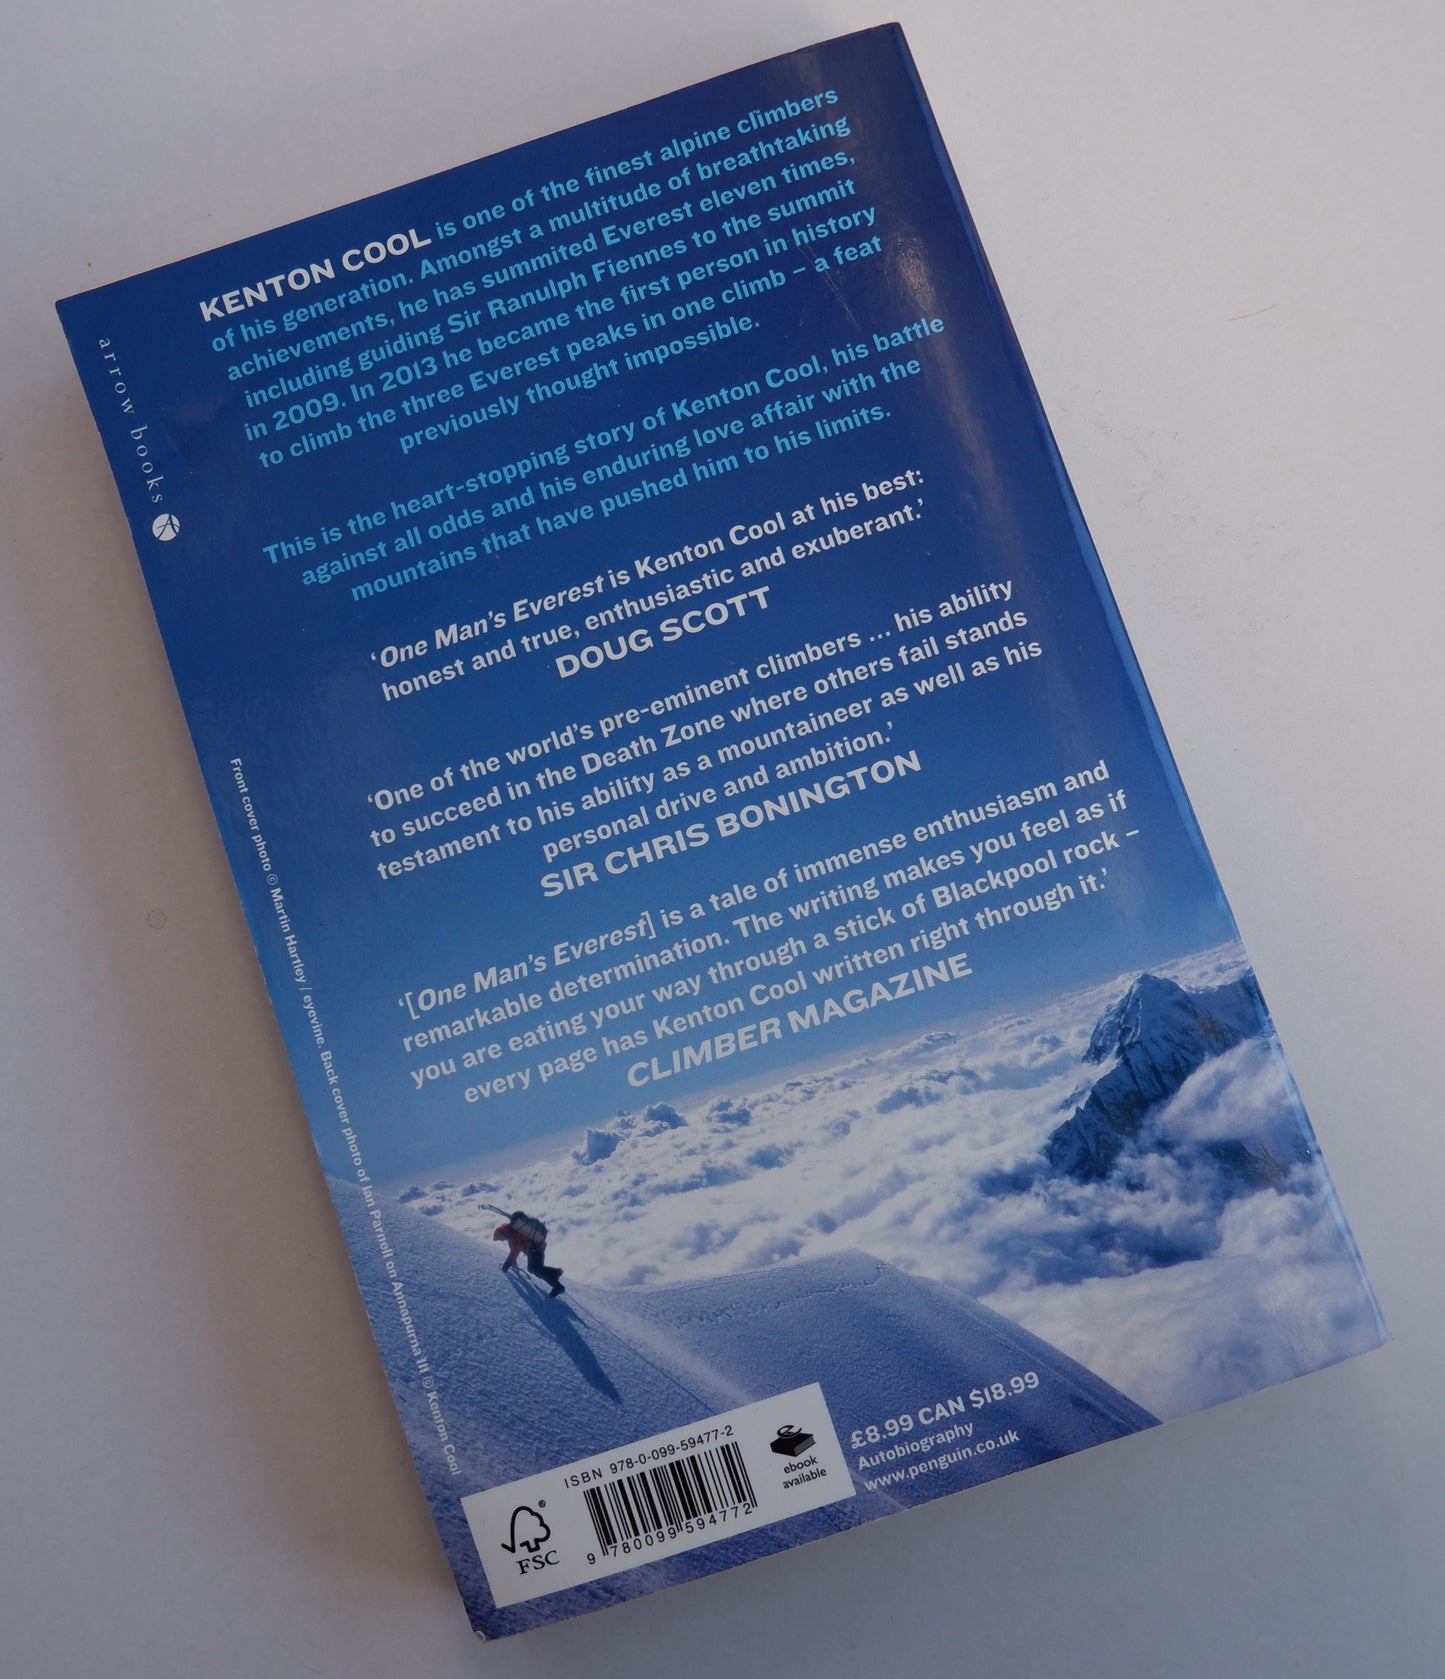 One Man’s Everest: The Autobiography of Kenton Cool